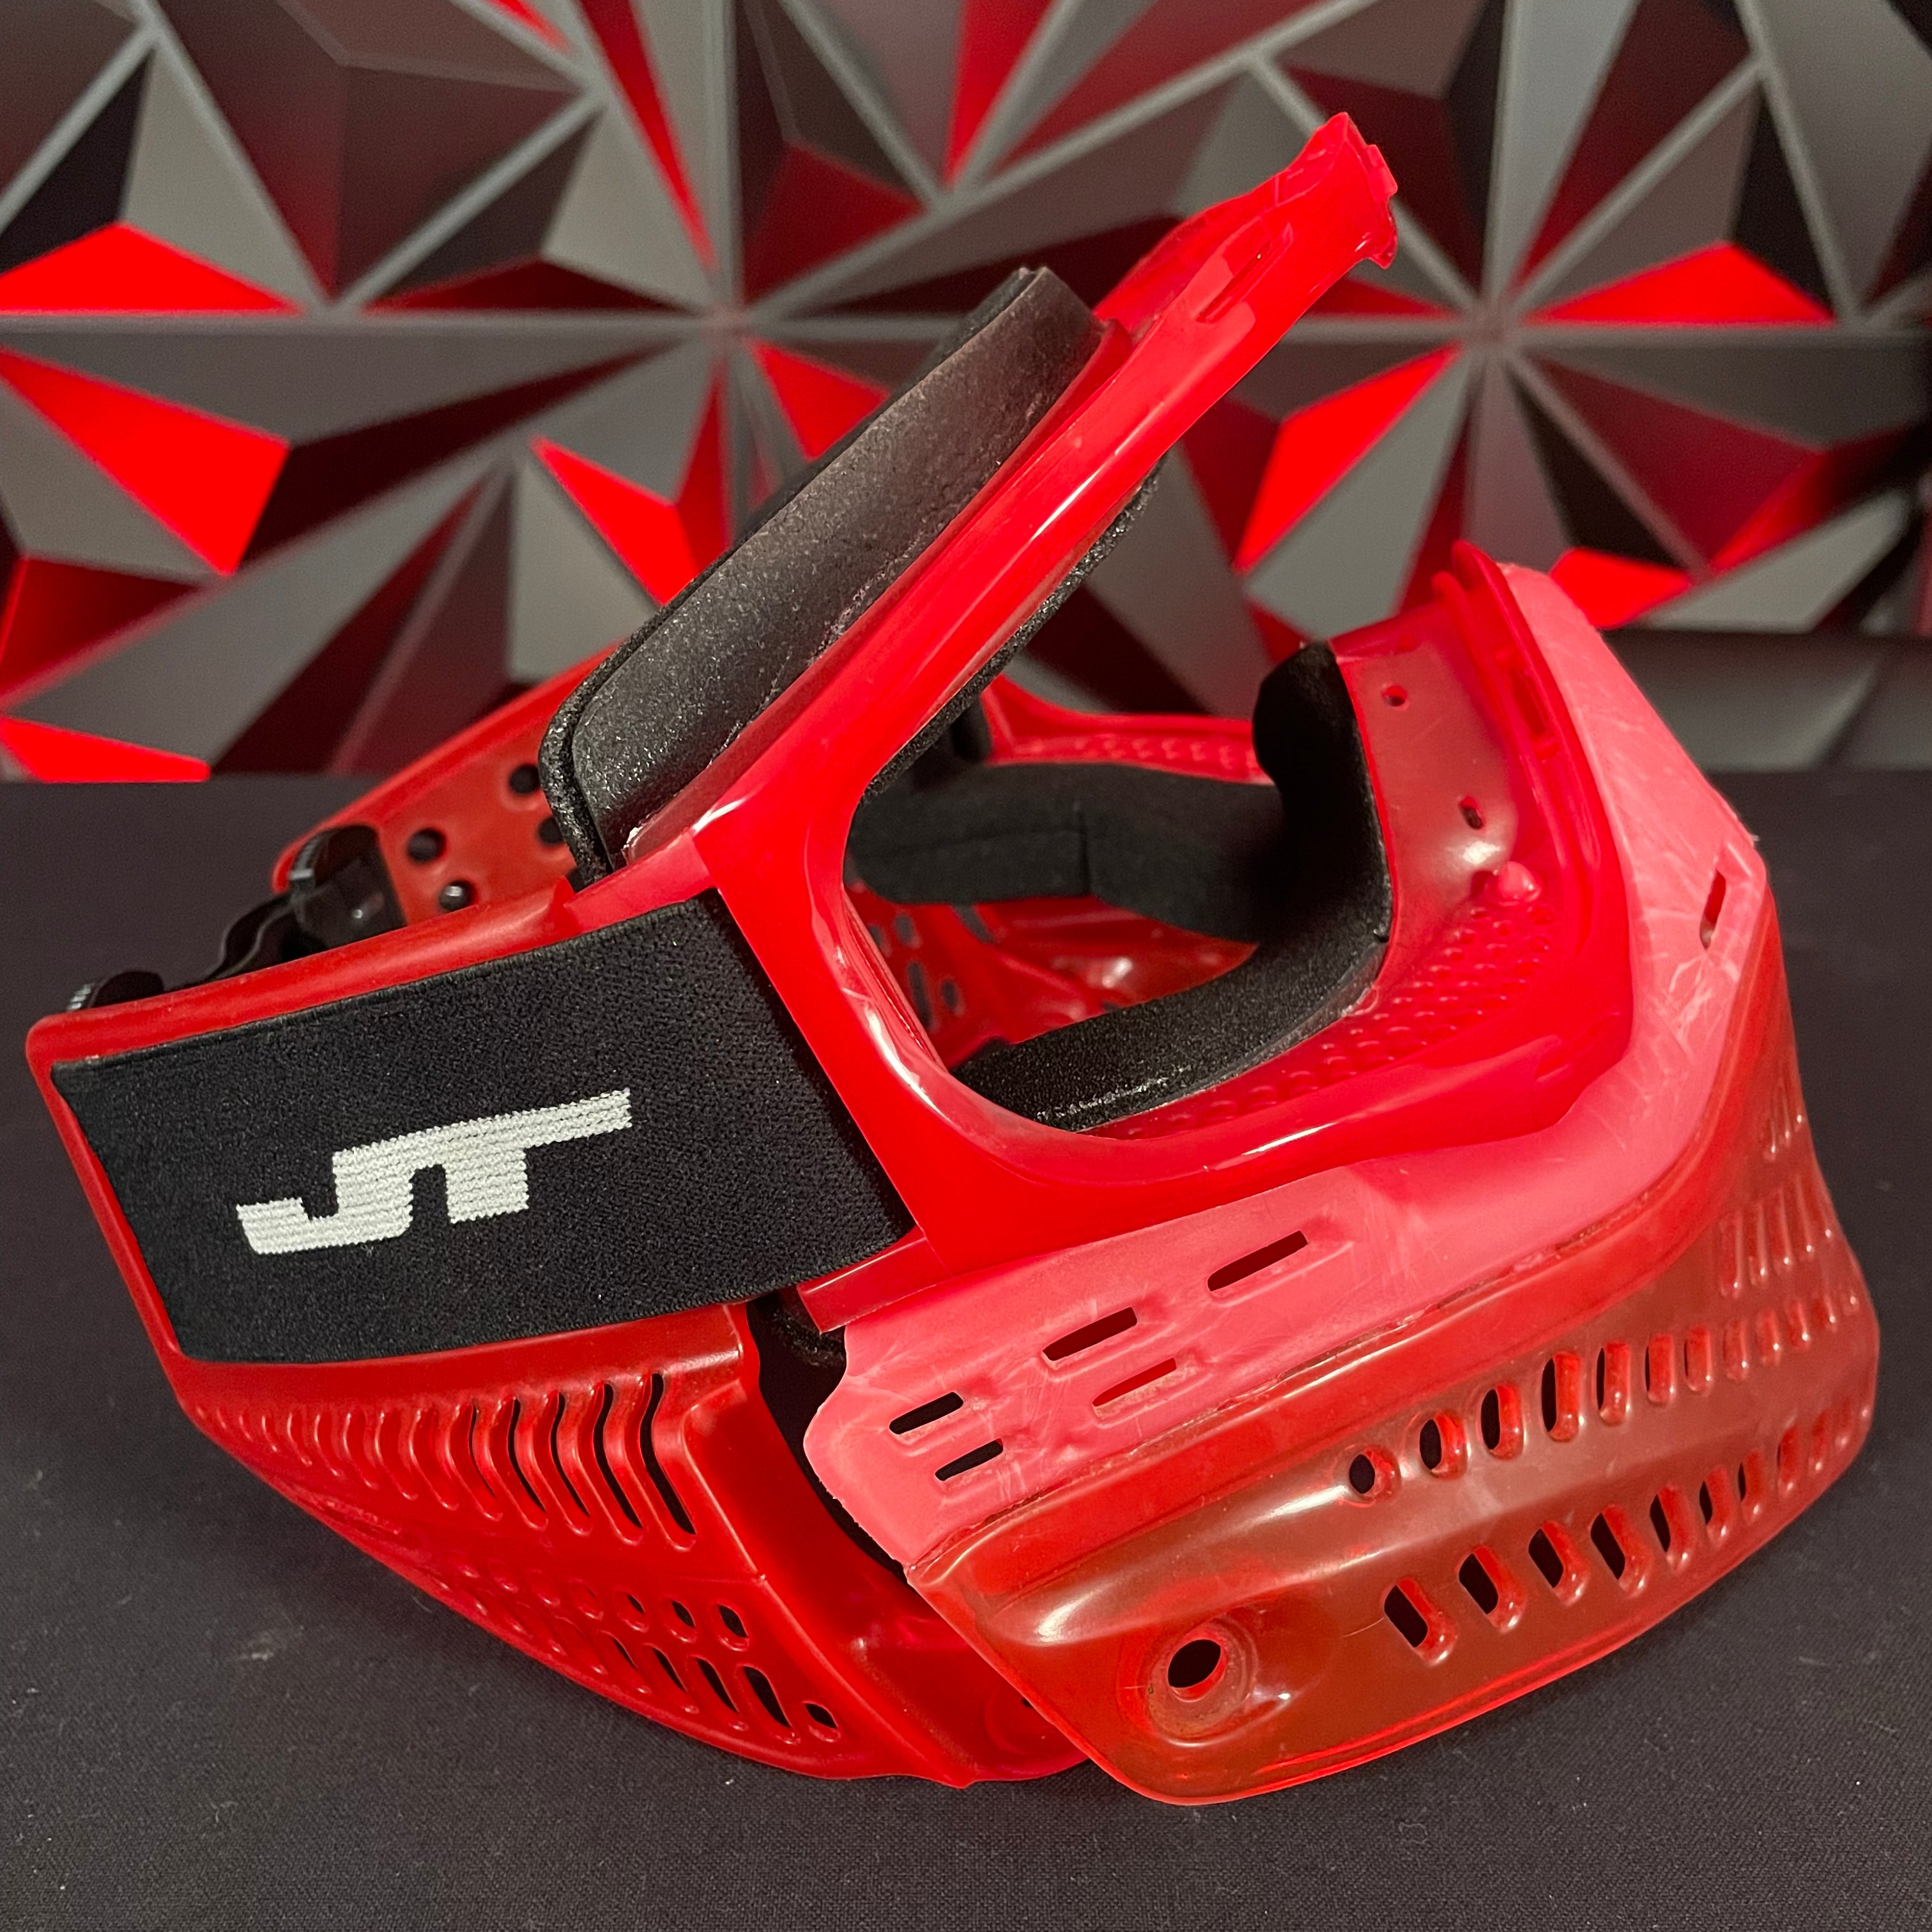 Used JT Proflex Paintball Mask - OG Red Bottoms w/ Red ICE Frame